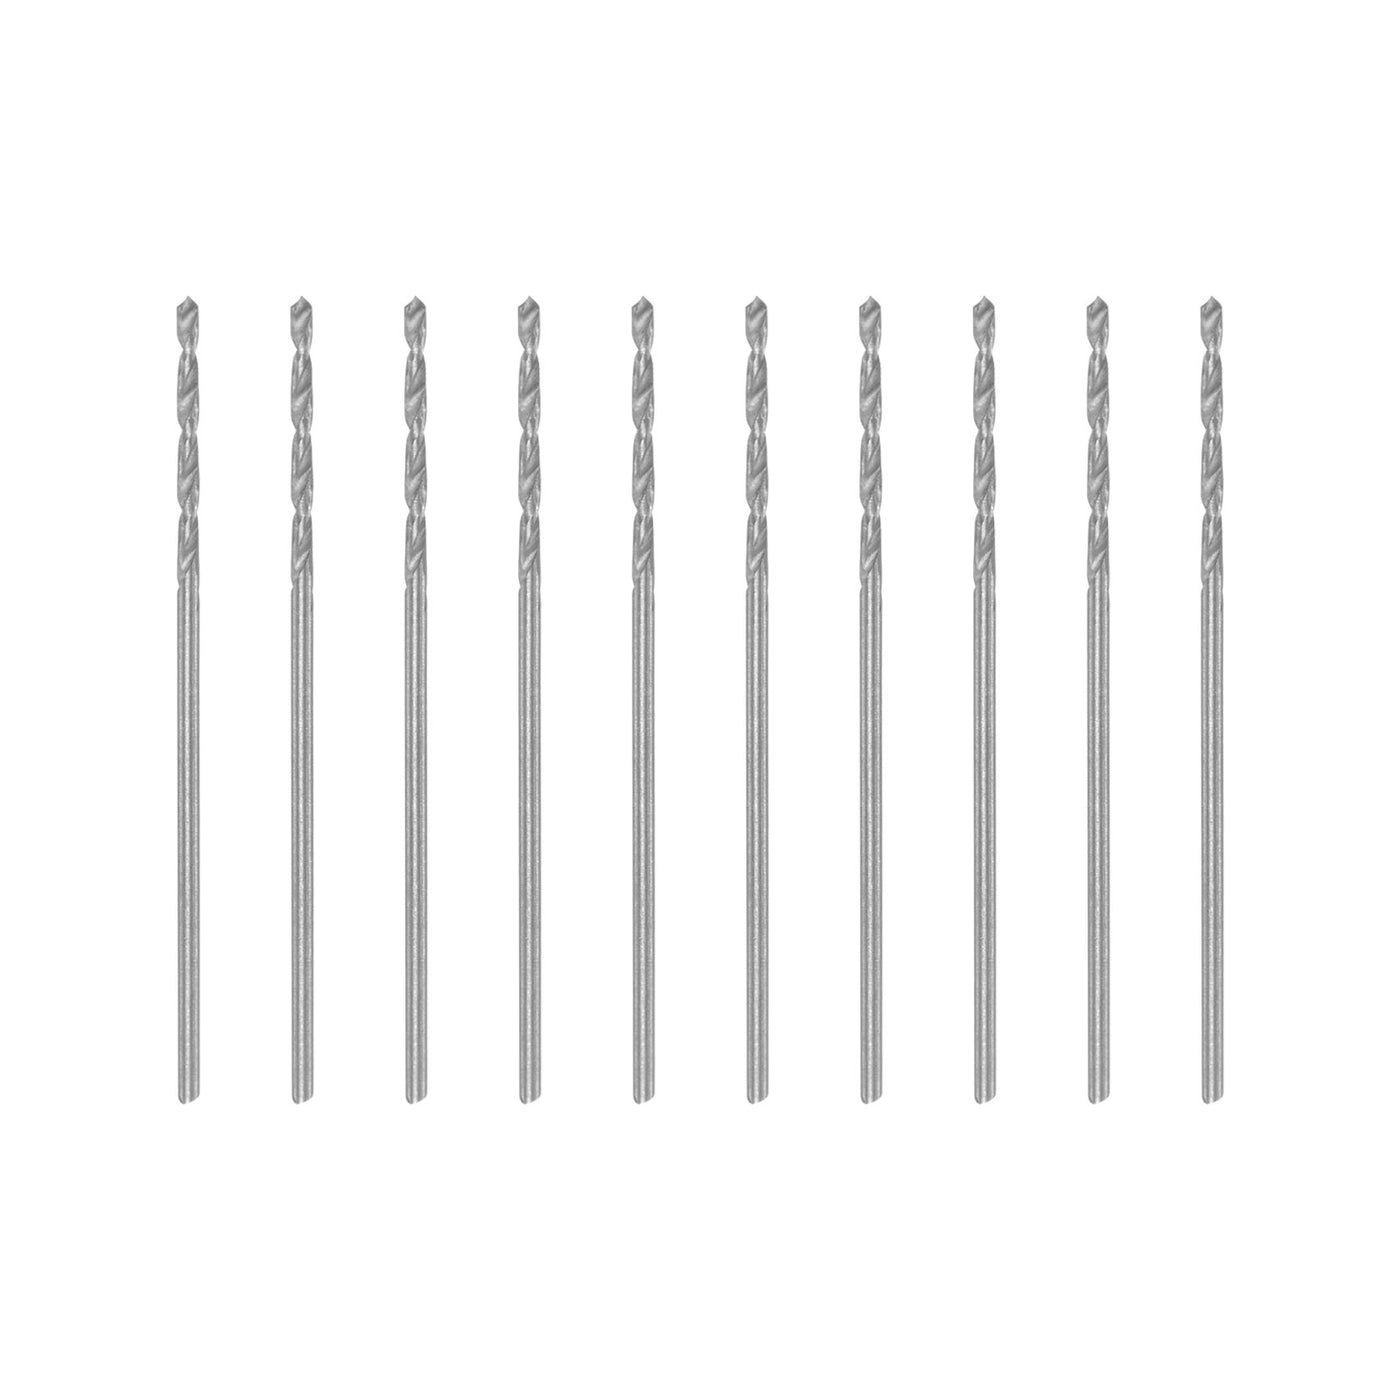 uxcell Uxcell 10 Pcs 0.85mm High Speed Steel Drill Bits, Fully Ground 30mm Length Drill Bit